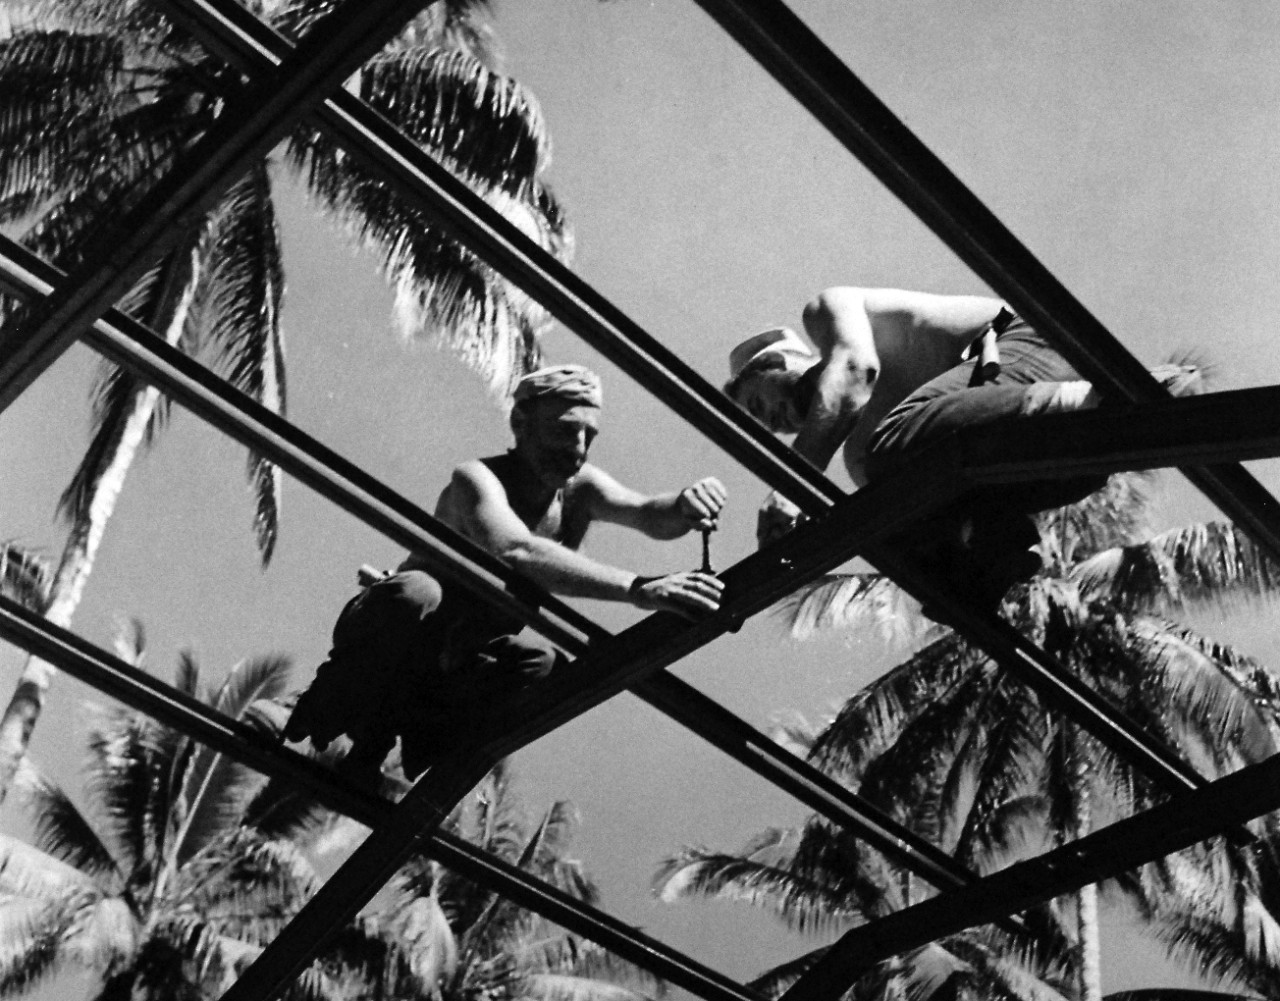 80-G-39217: Guadalcanal Campaign, August 1942-February 1943.  U.S. Navy Seabees constructing a Quonset Hut at Guadalcanal, January 30, 1943.    Official U.S. Navy photograph, now in the collections of the National Archives.  (2016/12/06).